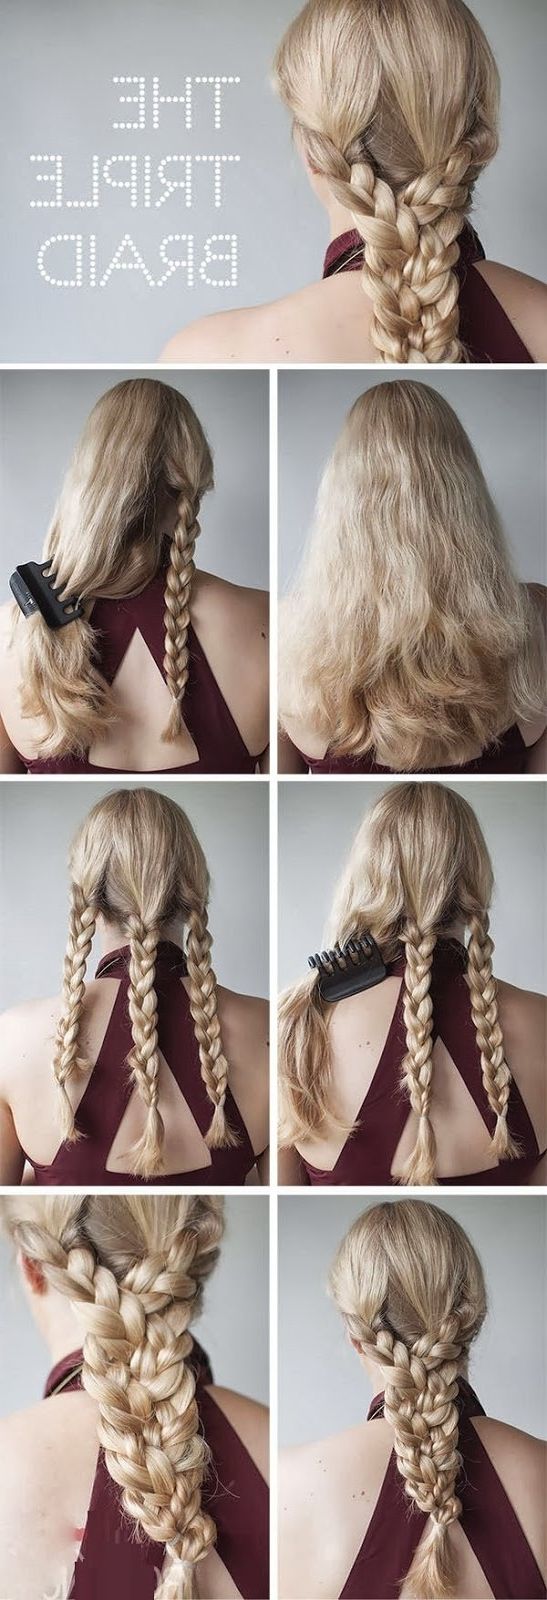 12 Romantic Braided Hairstyles With Useful Tutorials – Pretty Designs In Most Recent Romantic Braid Hairstyles (View 4 of 15)